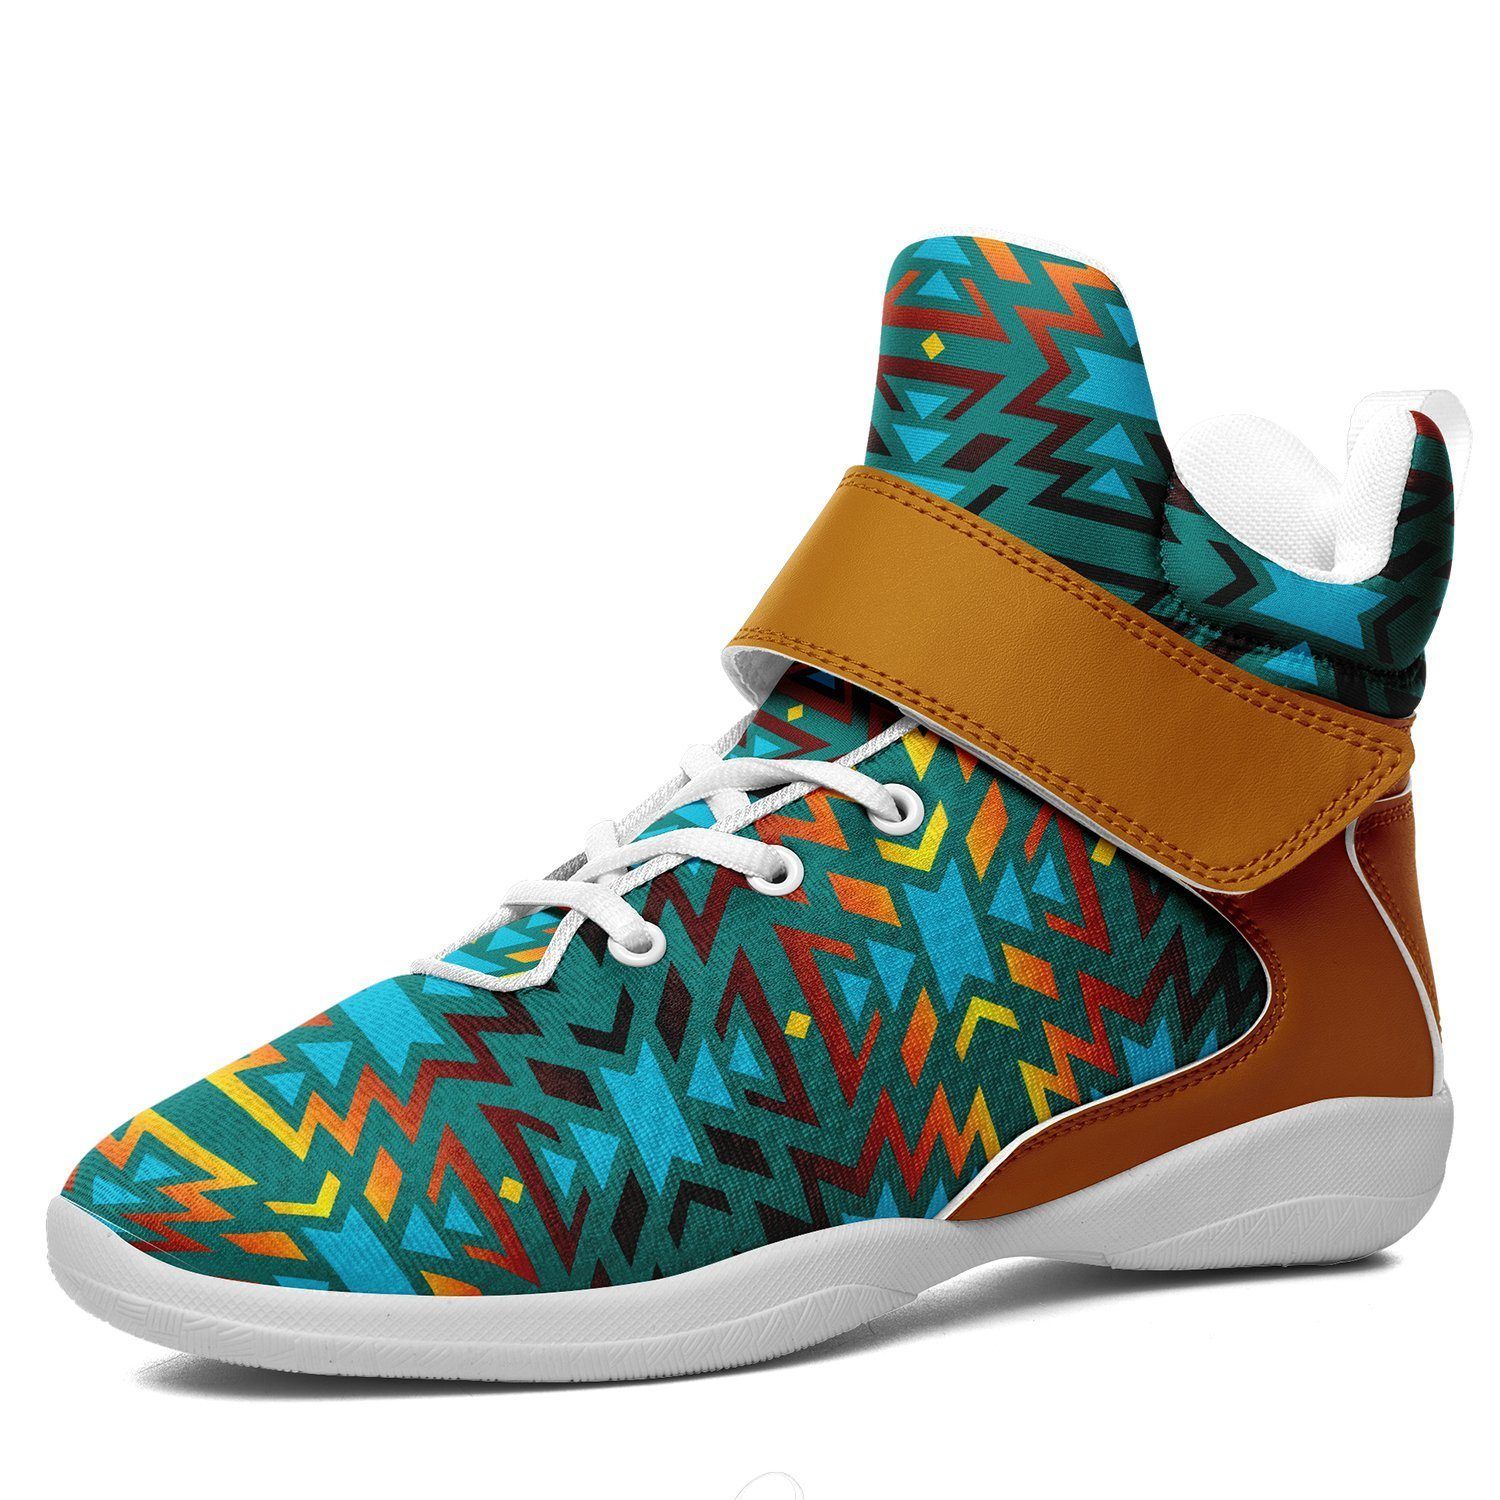 Fire Colors and Turquoise Teal Kid's Ipottaa Basketball / Sport High Top Shoes 49 Dzine US Child 12.5 / EUR 30 White Sole with Brown Strap 